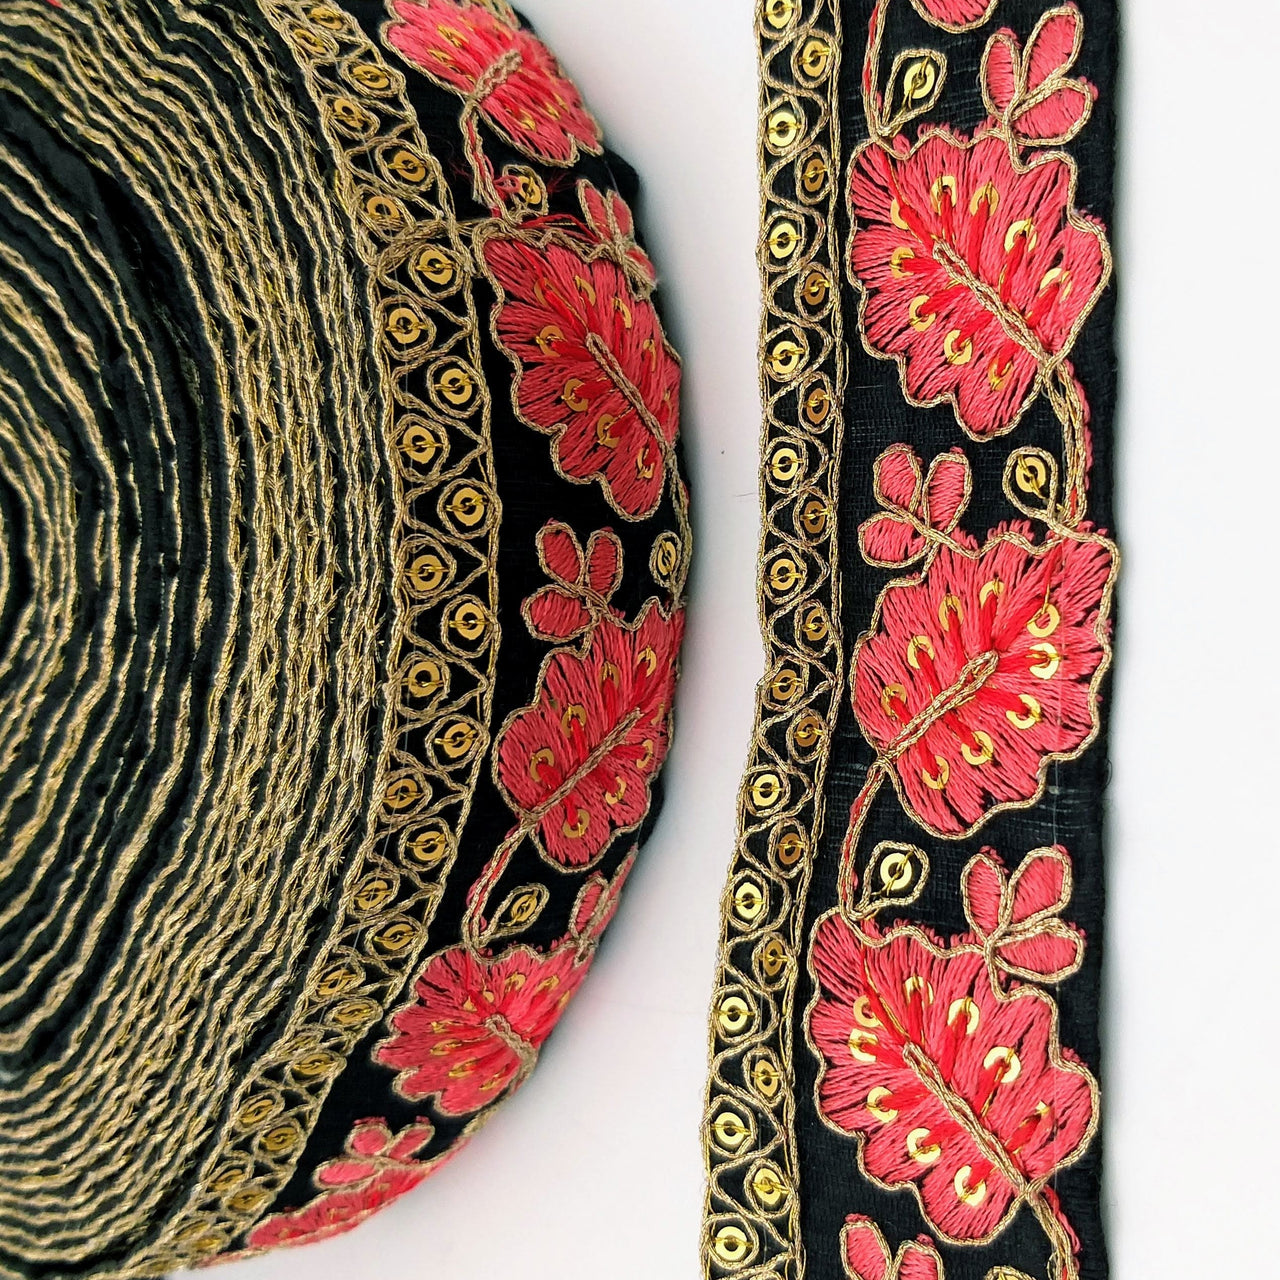 Black Trim with Floral Embroidery Salmon Pink Embroidered Leaves Trim, Decorative Trim, Indian Border